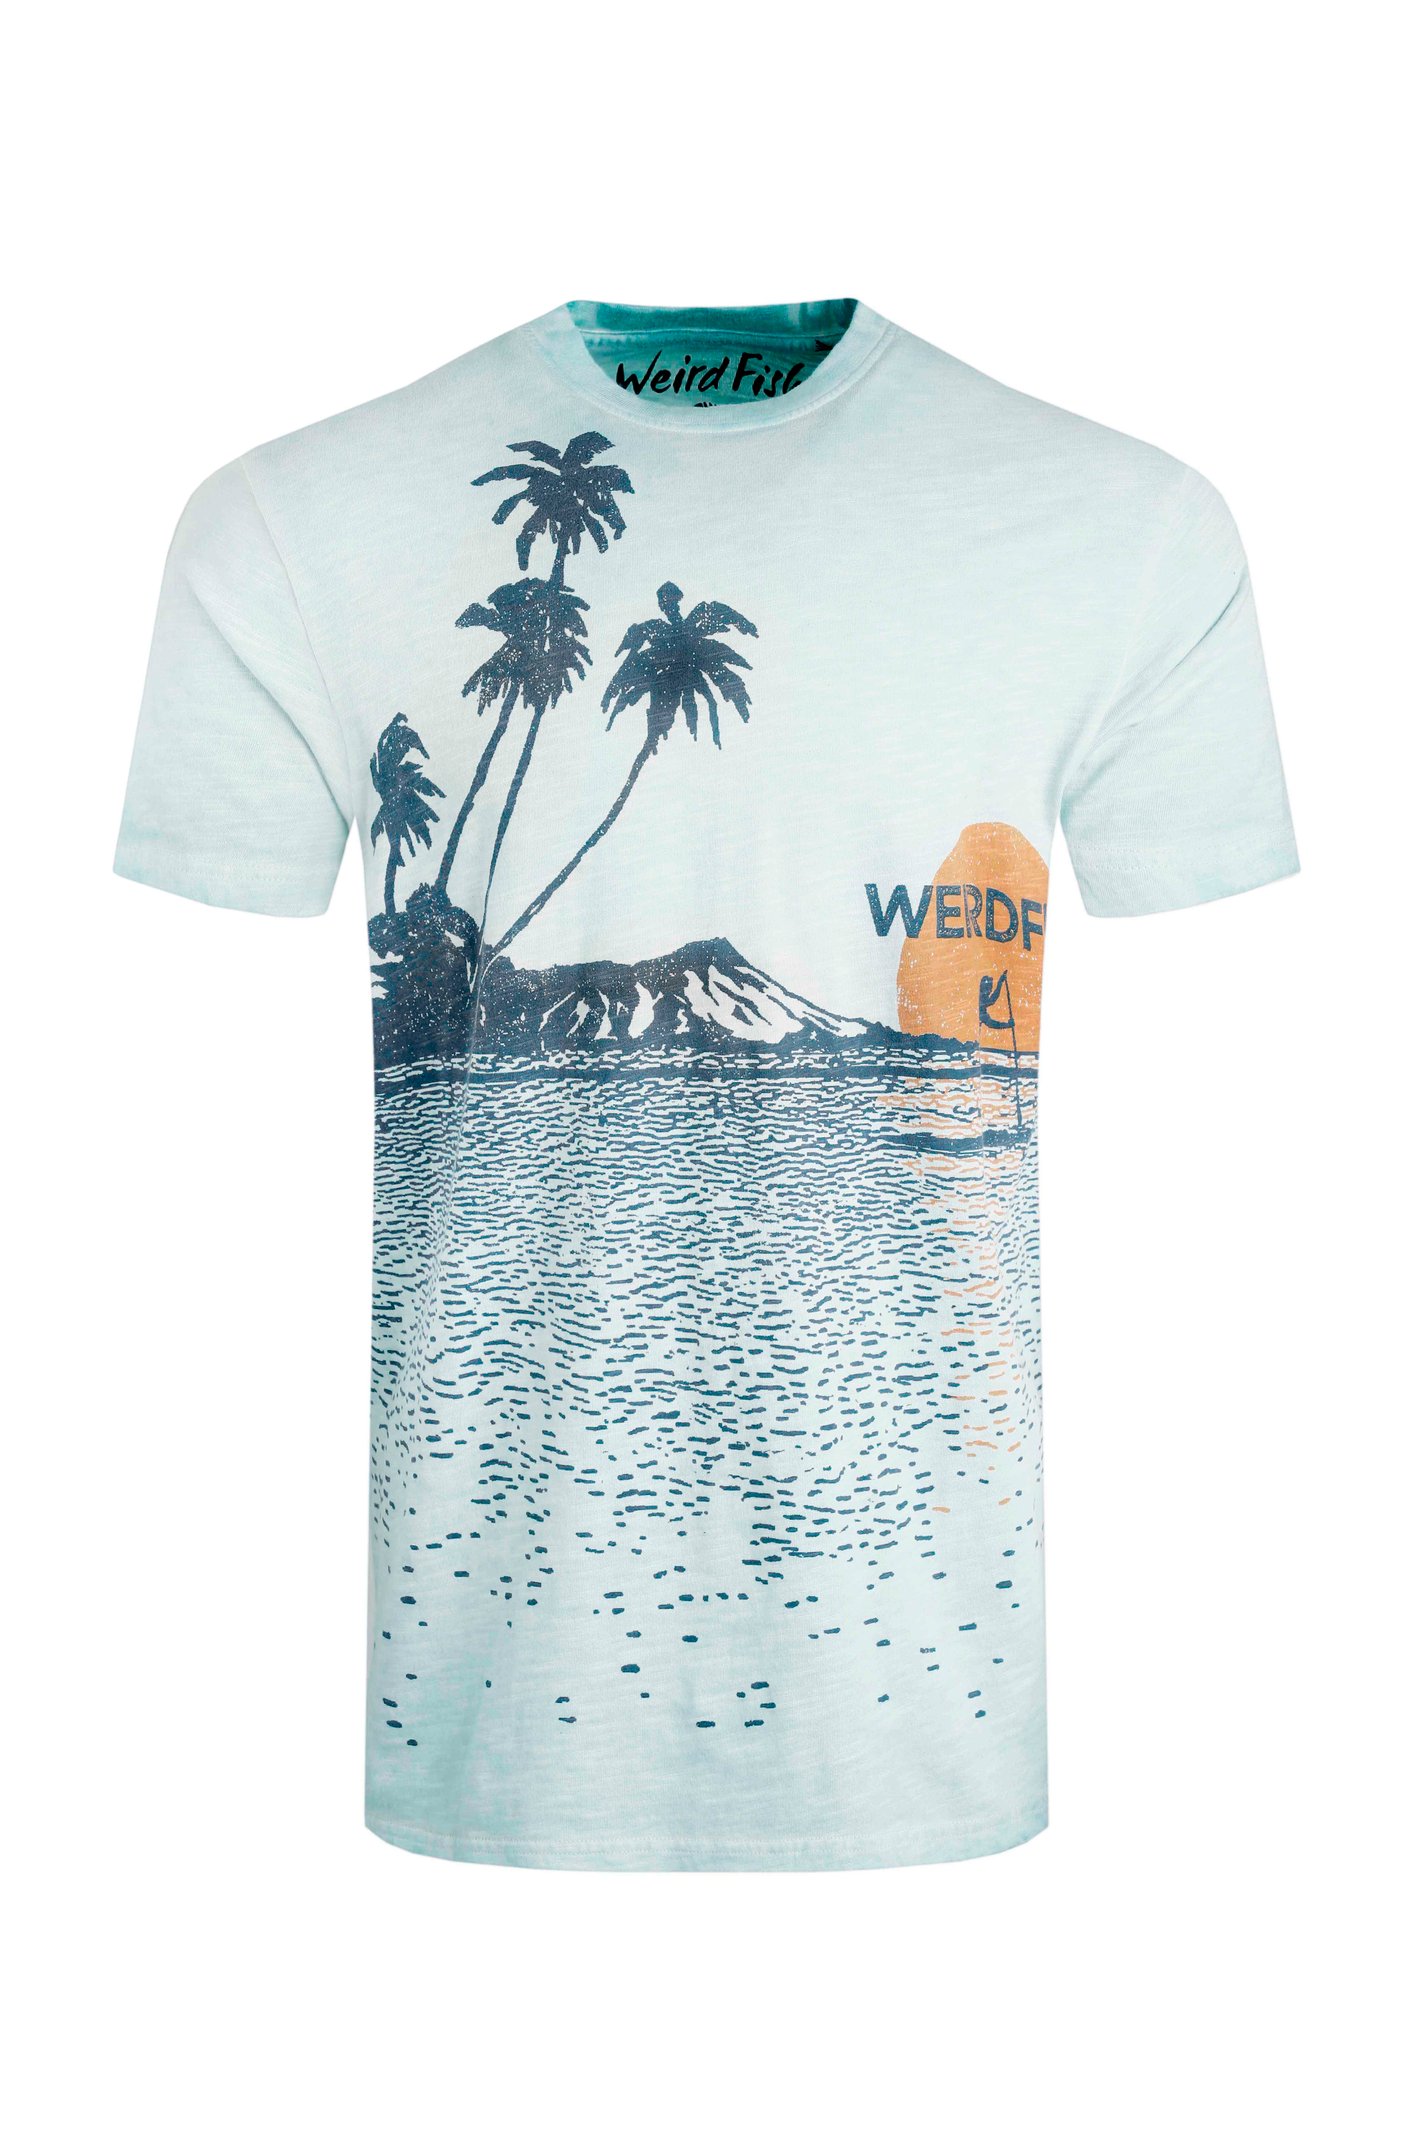 Weird Fish Sunlight Washed Out Slub T-Shirt Blue Surf Size S